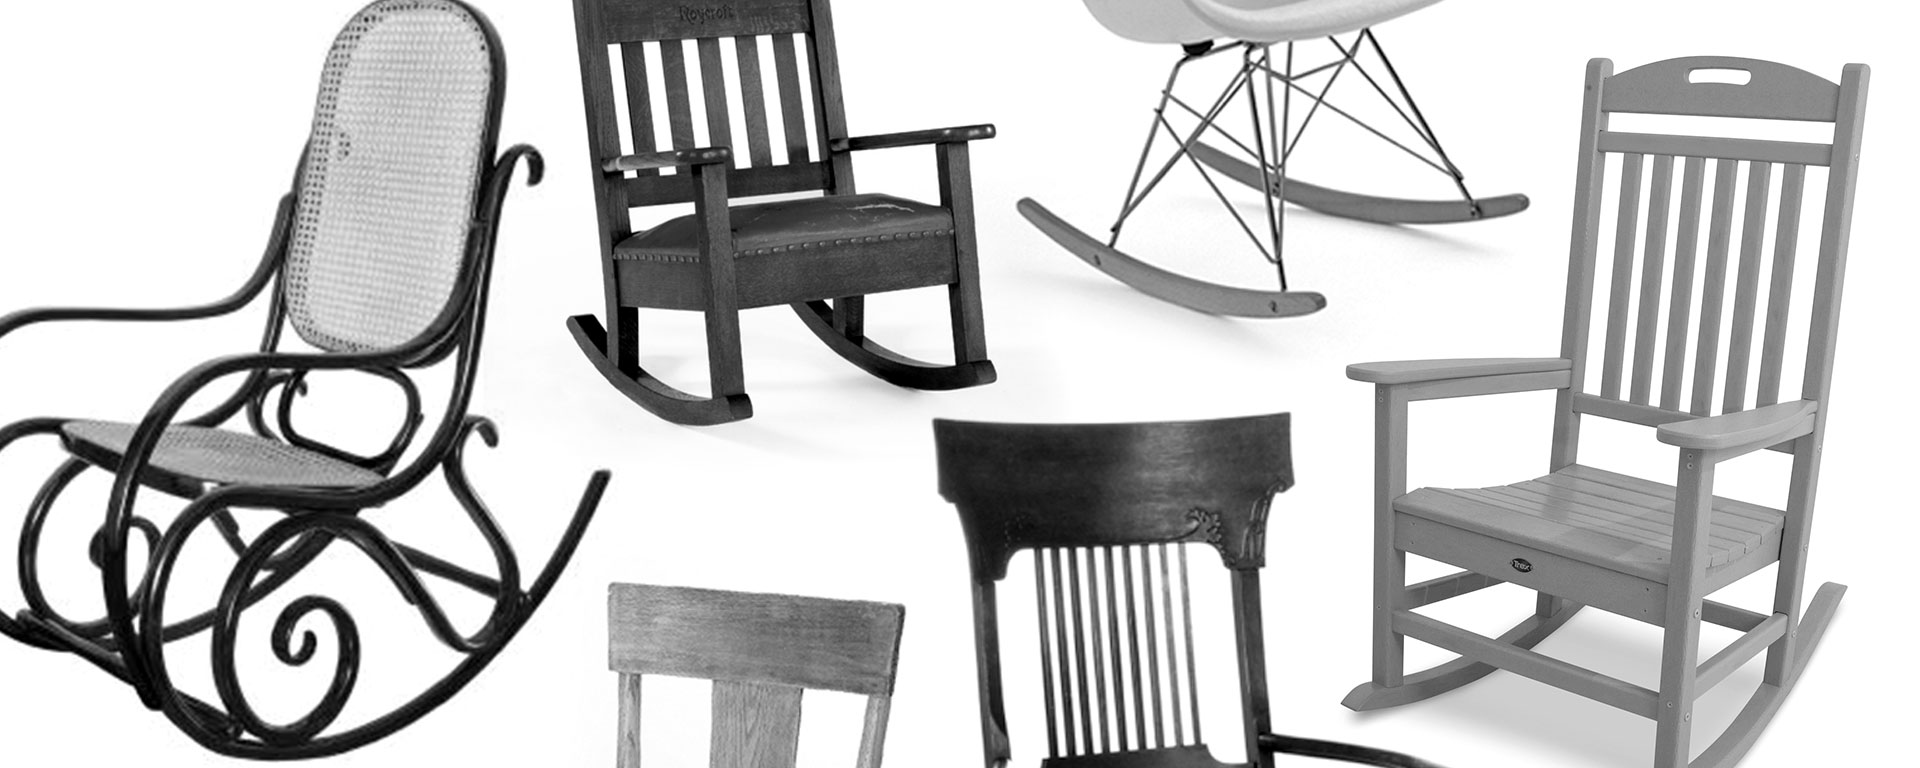 Rocking-Chair-Collage-FEATURED-Wide